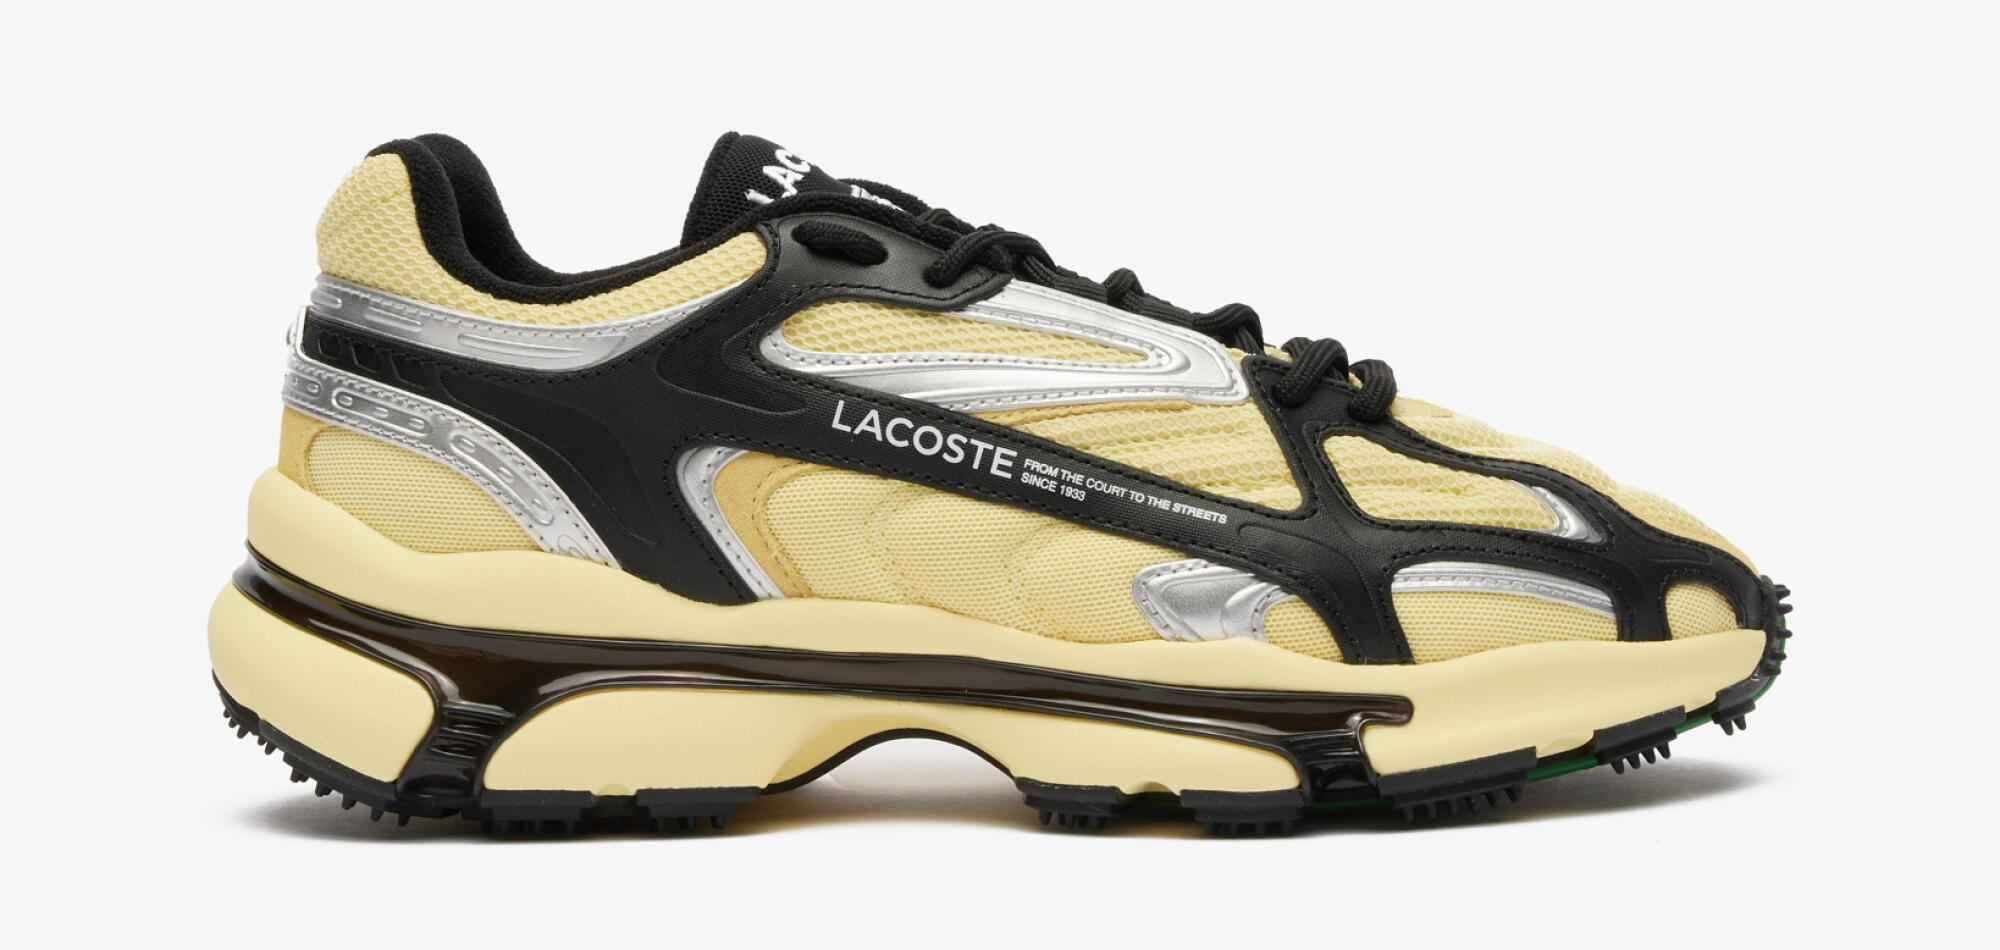 Lacoste sneakers in butter yellow.